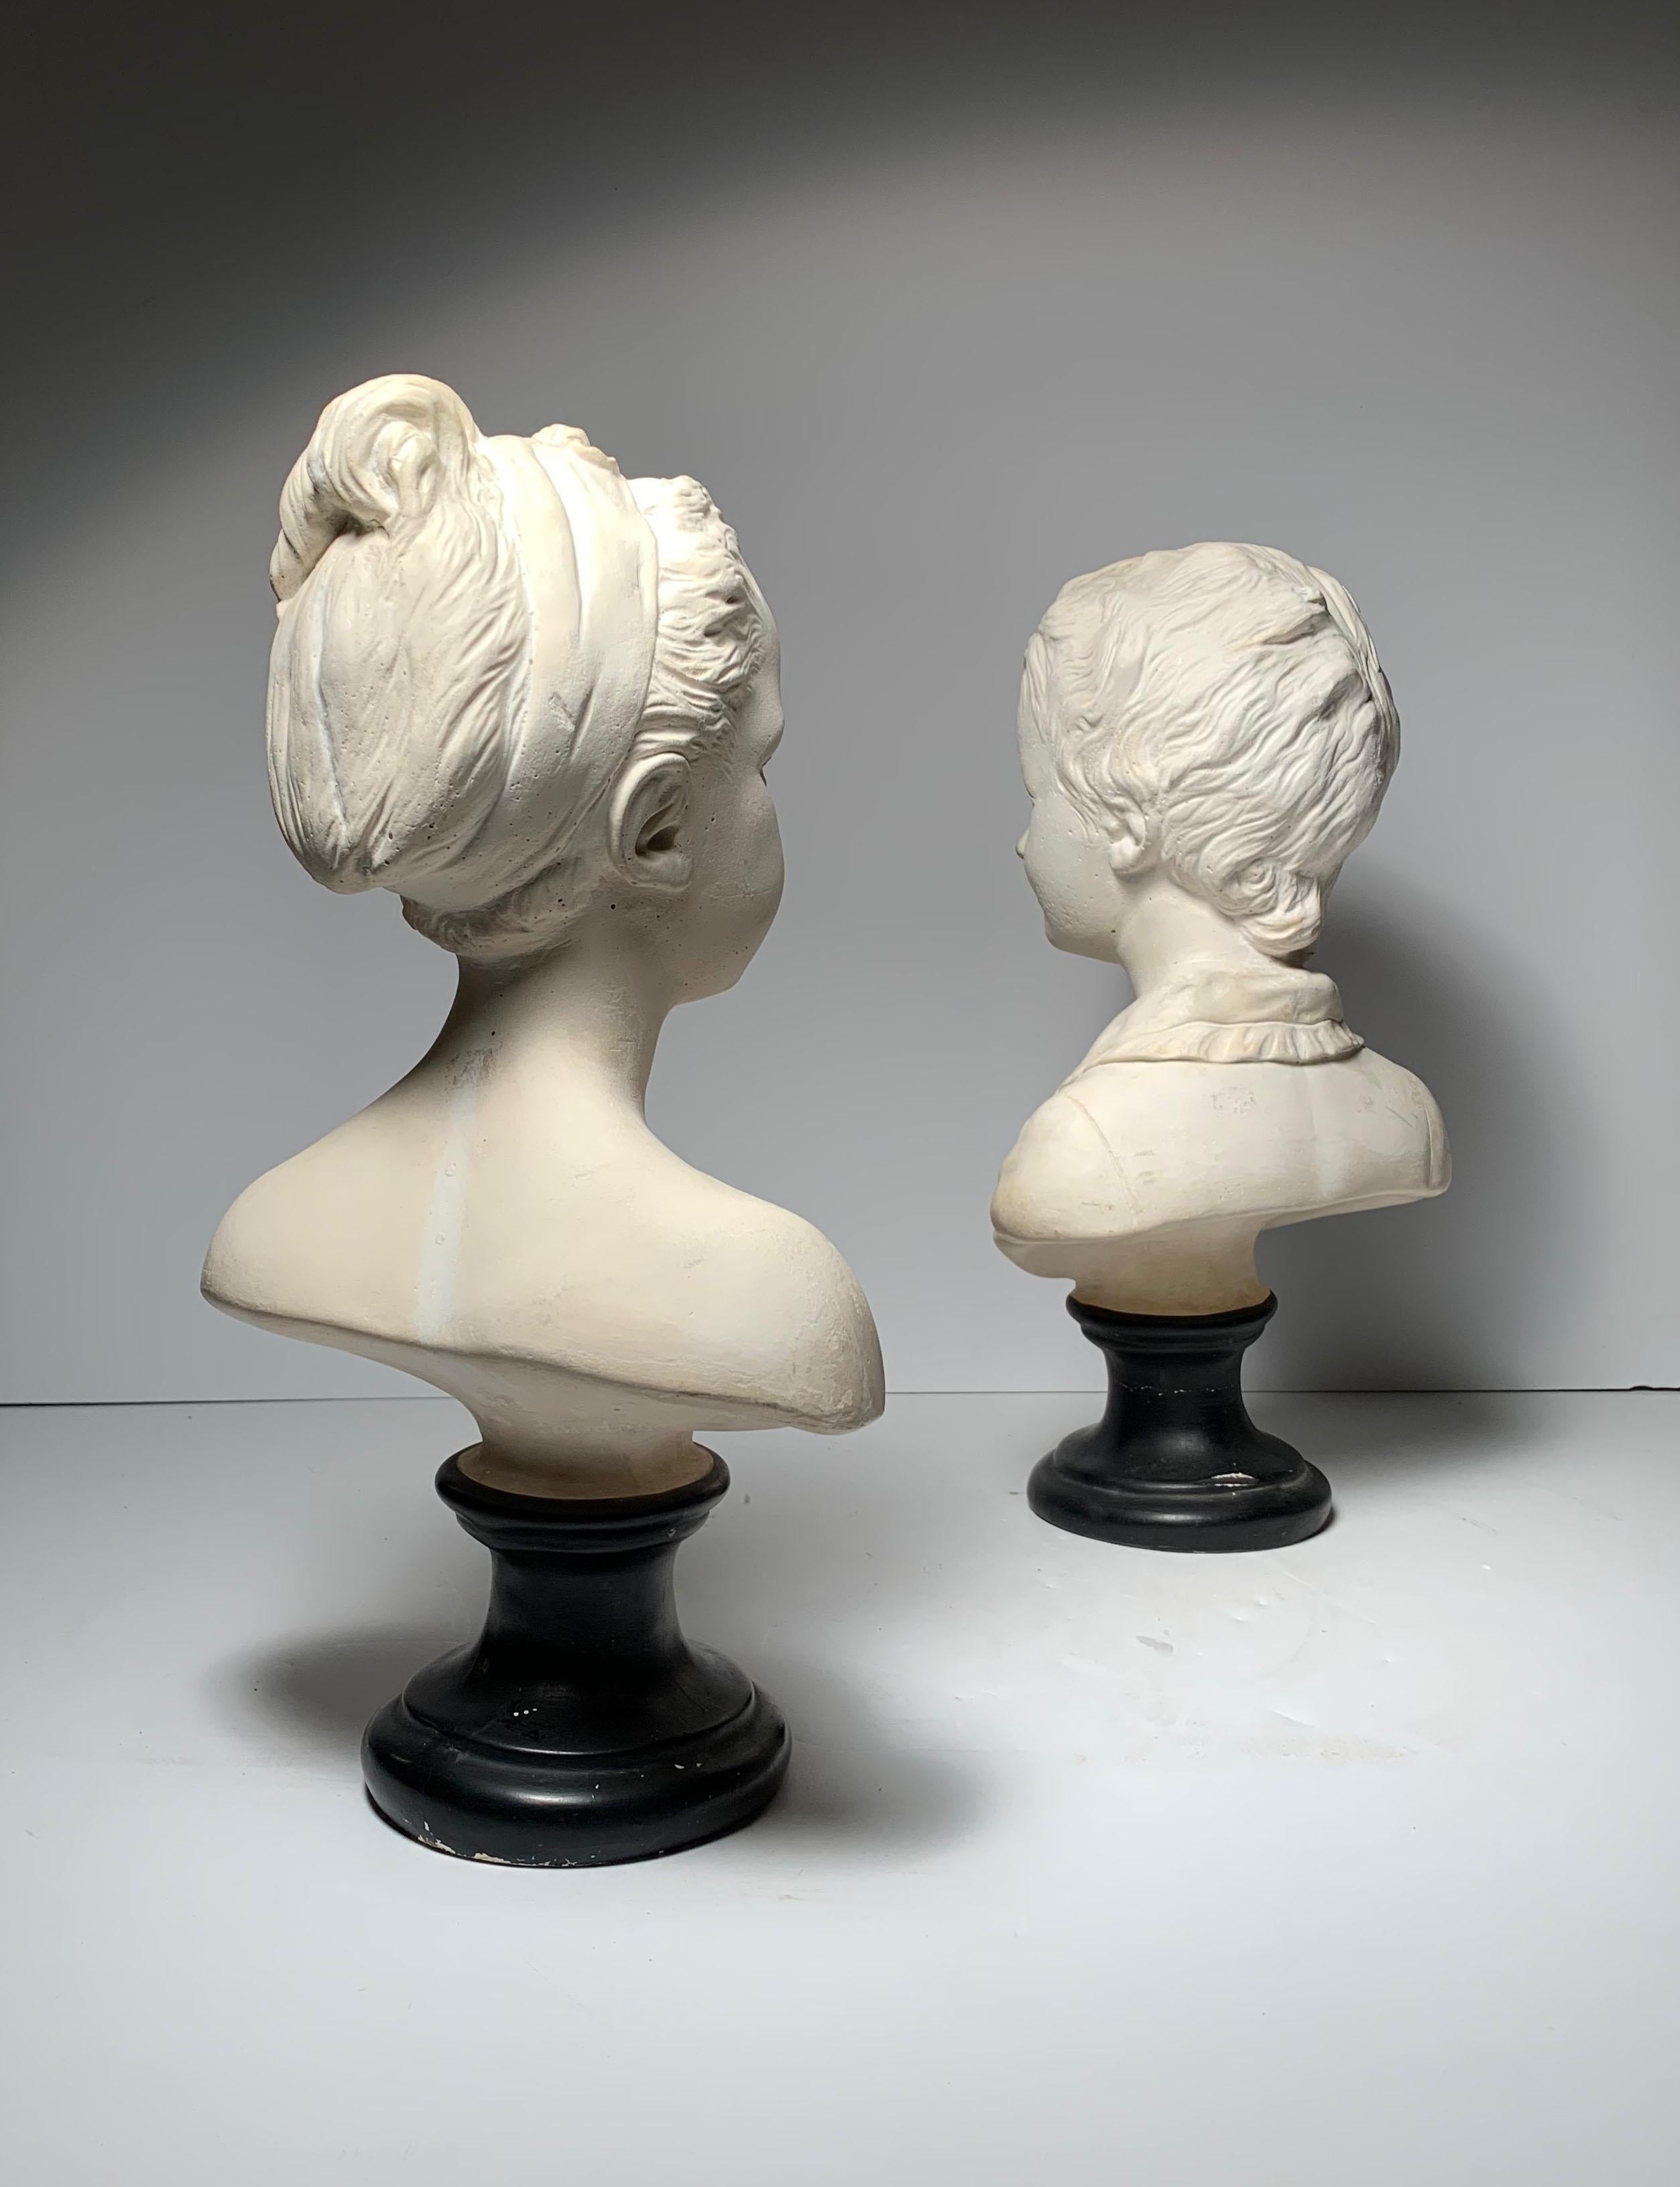 Vintage mid-20th century Decorative plaster Busts of Alexandre and Louise Brongniart modeled after the originals by Jean Antoine Houdon.
Both busts bear the impressed names Houdon faintly on back underside. No labels but possibly made by Borghese,